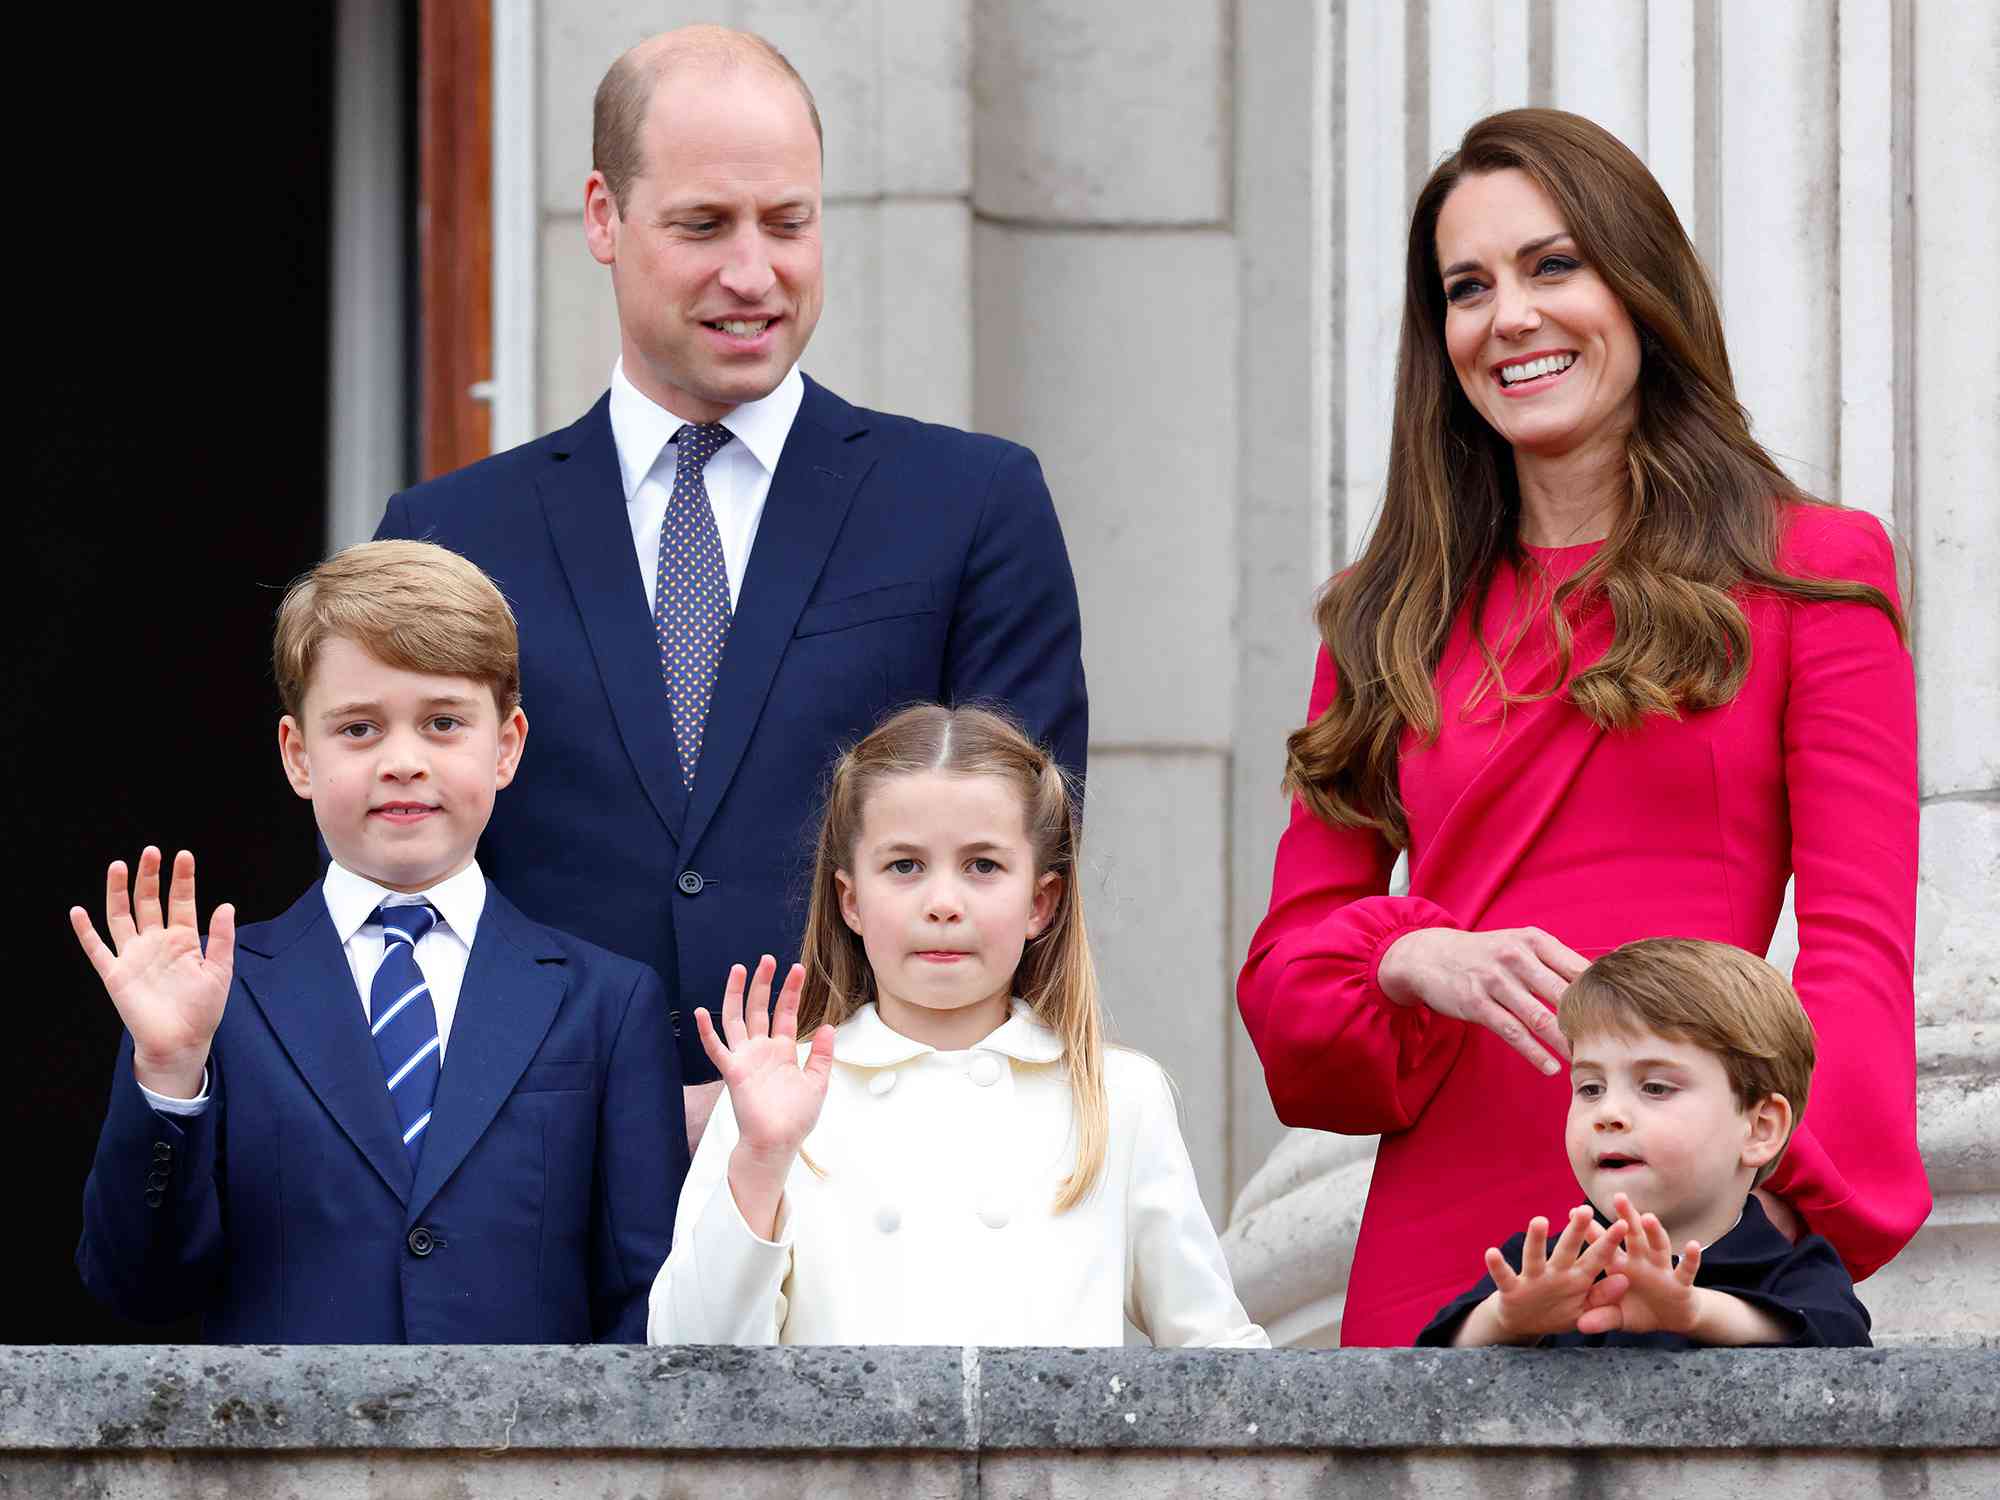 Prince George, Prince William, Princess Charlotte, Prince Louis, and Catherine, Duchess of Cambridge on the balcony of Buckingham Palace following the Platinum Pageant in 2022.